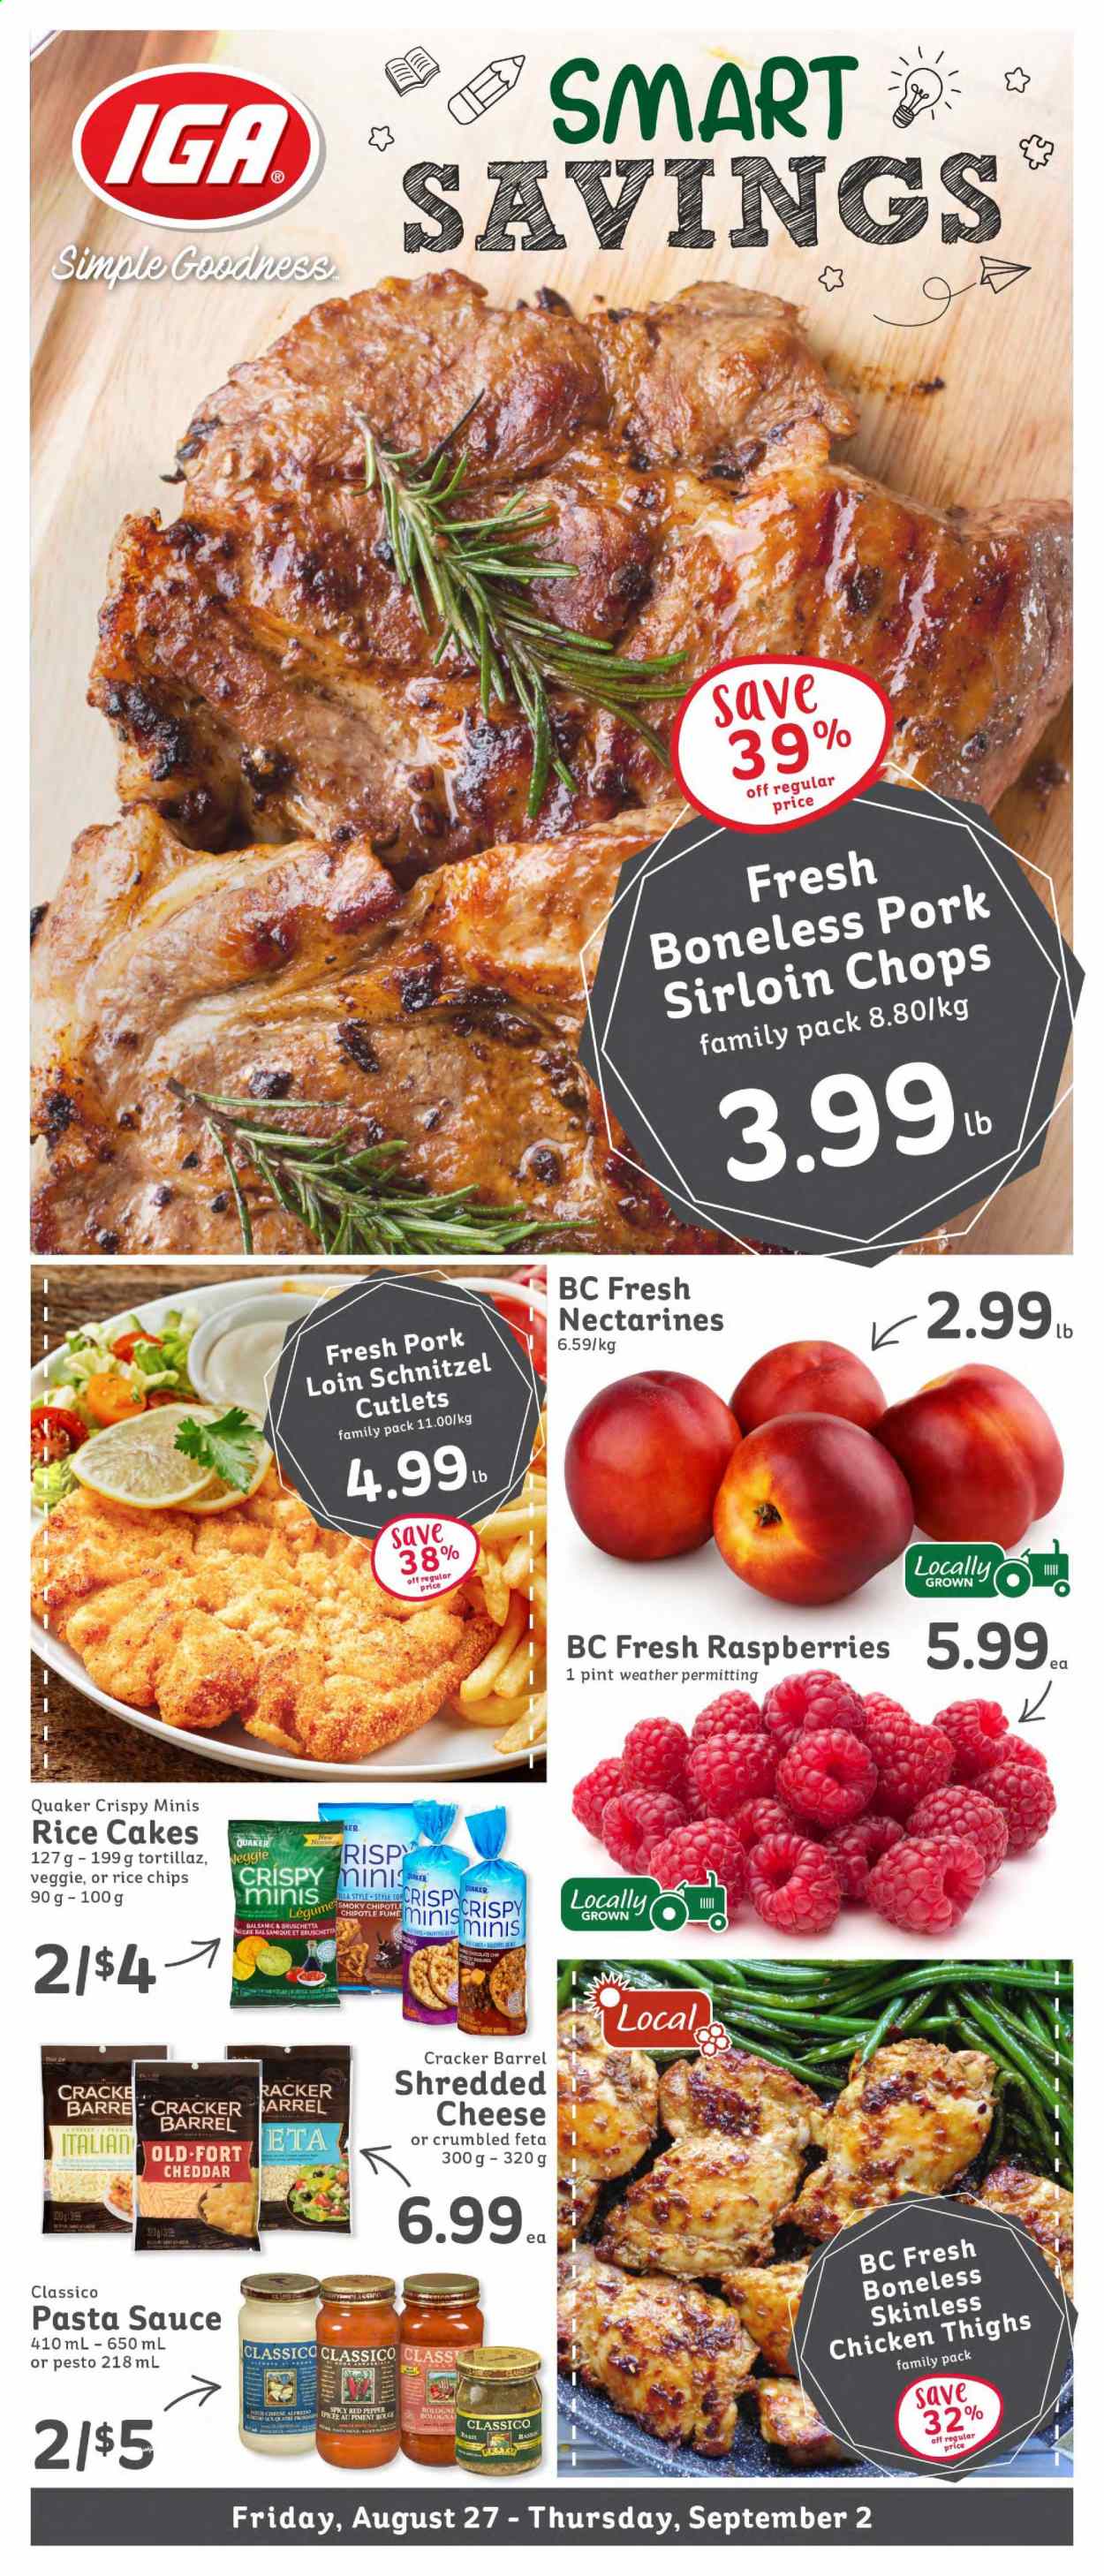 thumbnail - IGA Simple Goodness Flyer - August 27, 2021 - September 02, 2021 - Sales products - nectarines, pasta sauce, sauce, schnitzel, Quaker, bruschetta, bologna sausage, shredded cheese, feta, chocolate, crackers, Classico, basil pesto, chicken thighs, chicken, pork loin, chips. Page 1.